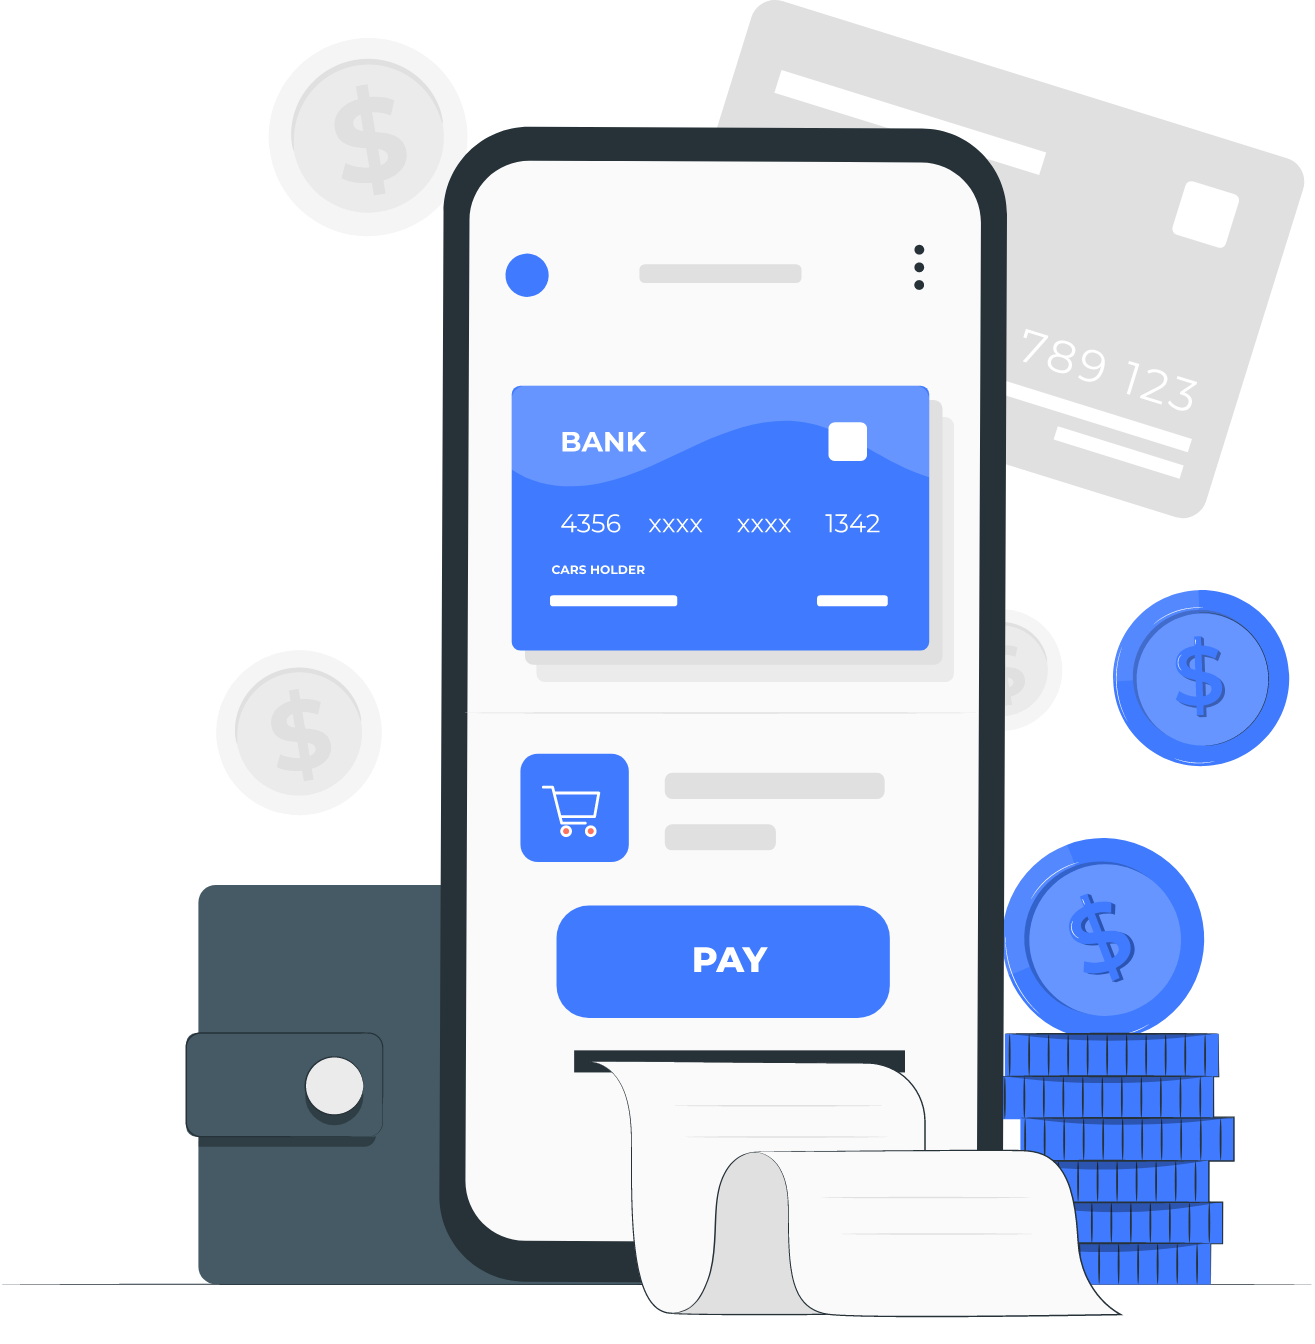 Features of Google Pay